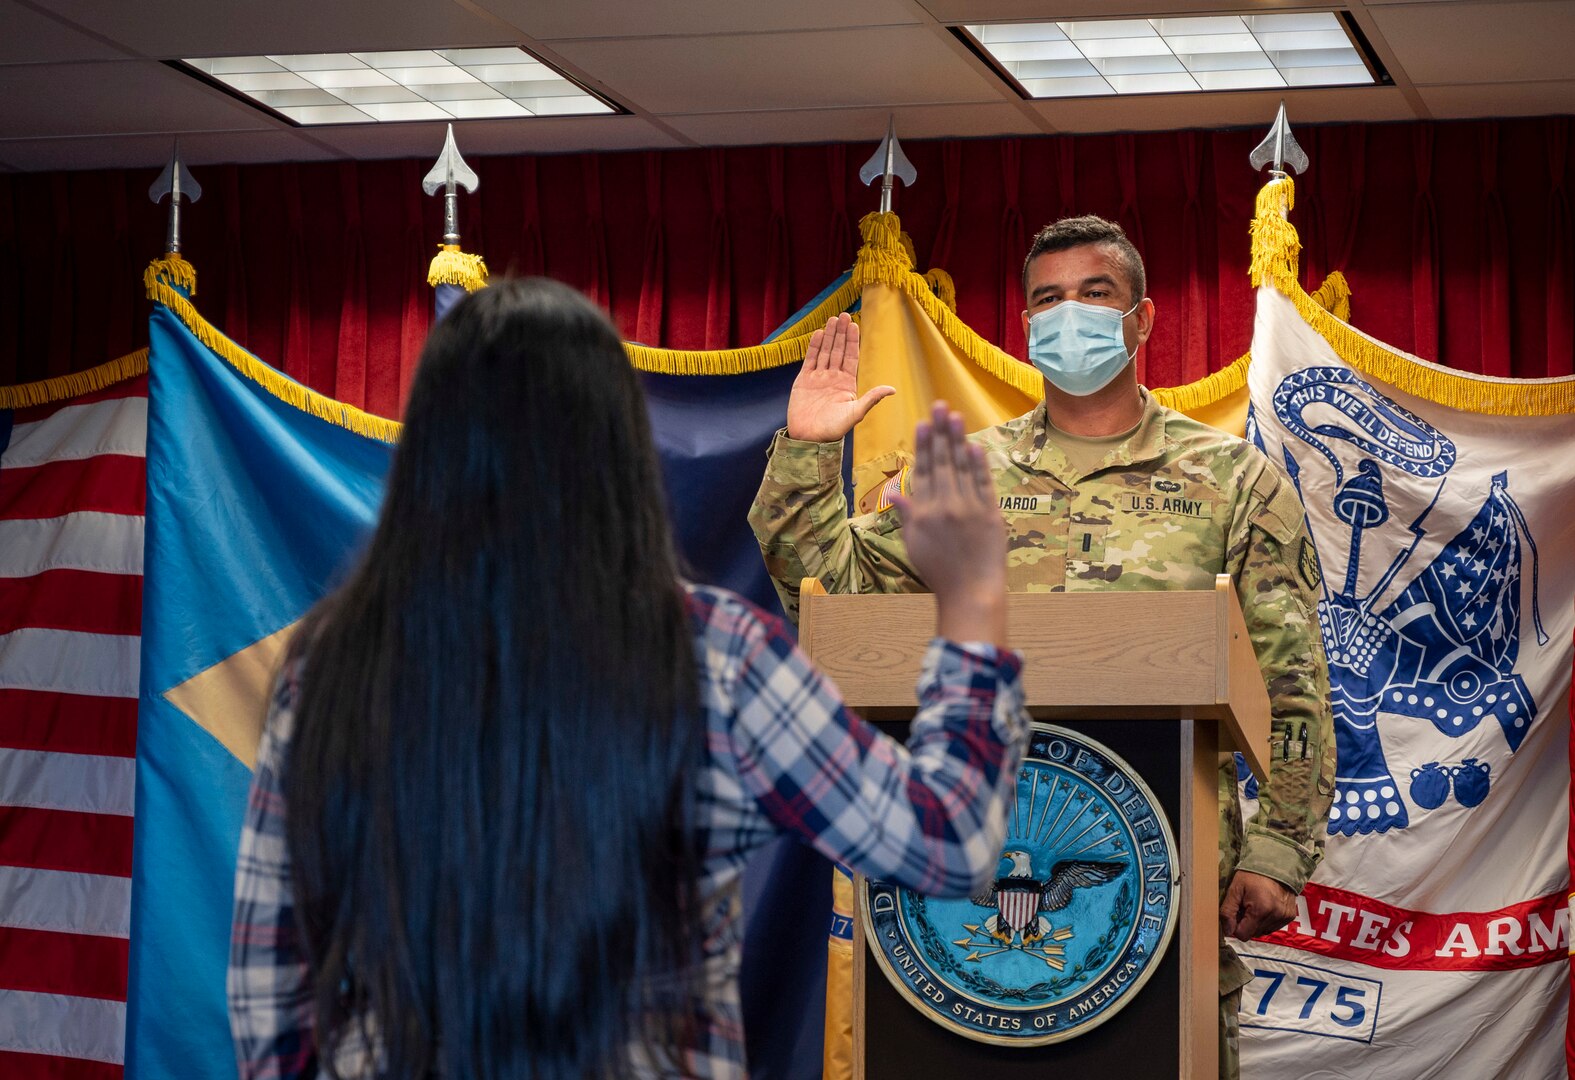 U.S. Army 1st Lt. Juan Fajardo, a native of Hamilton, N.J., administers the oath of enlistment to a future New Jersey Air National Guardsman at the Military Entrance Processing Station Fort Dix. MEPS